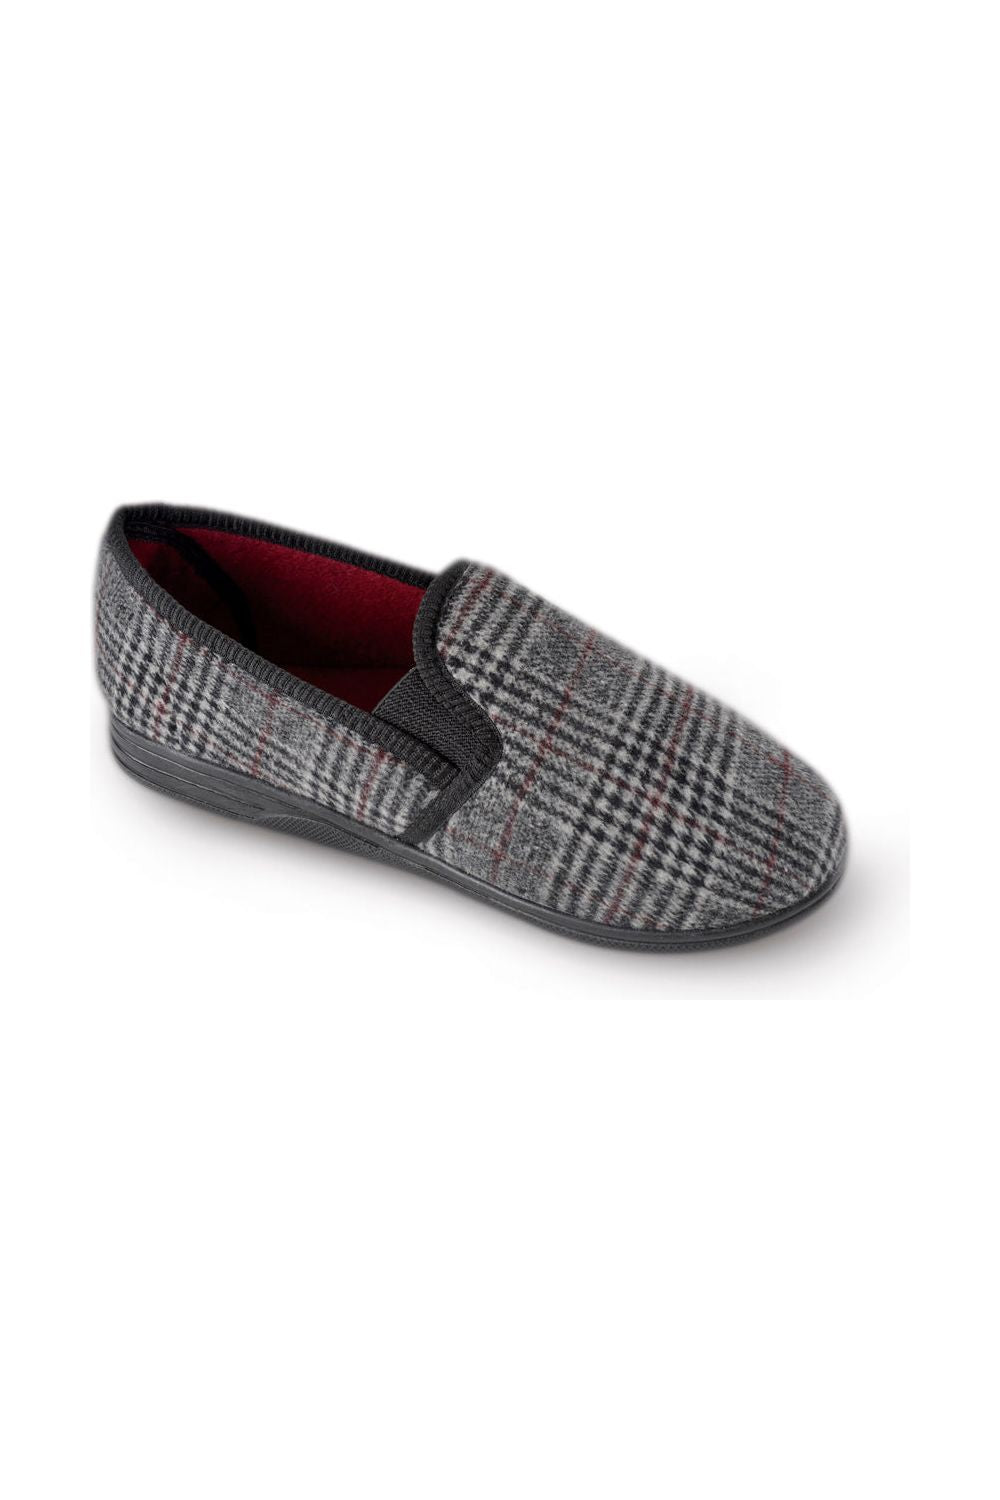 Men's Slip On Grey And Red Check Slippers With Elasticated Gussets